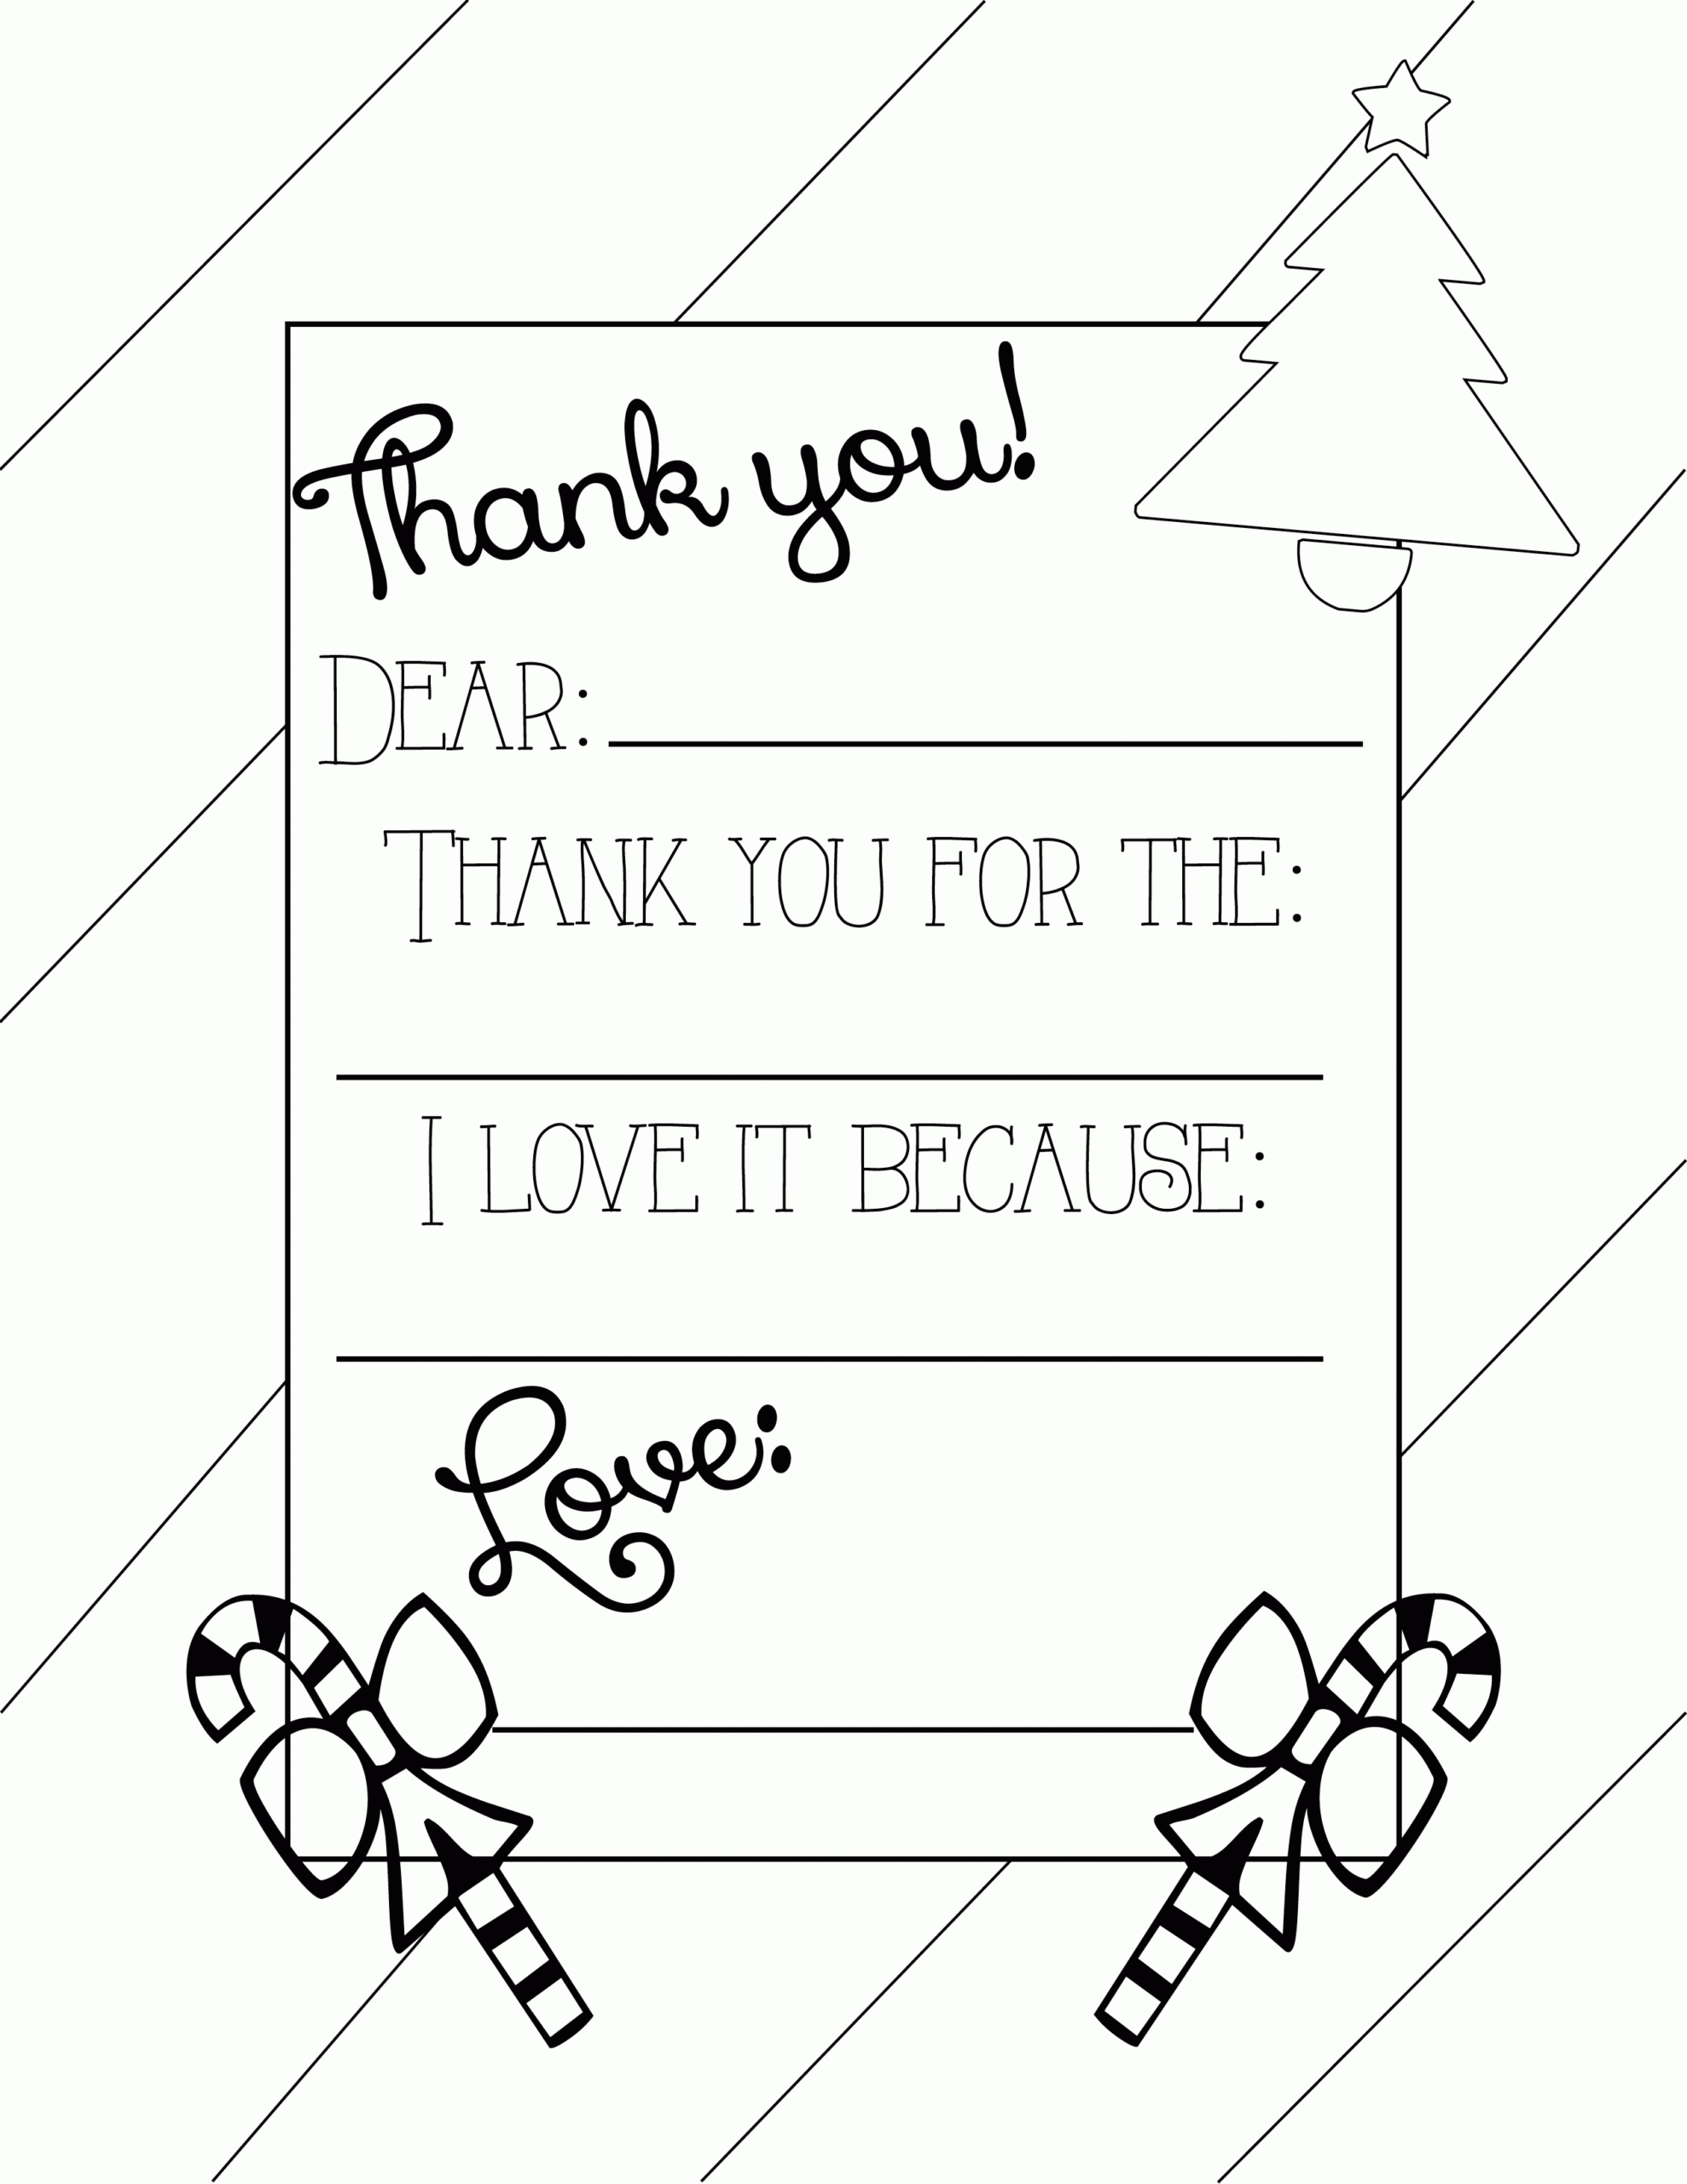 Printable Thank You Cards For Kids: Free Coloring Page Pertaining To Soccer Thank You Card Template